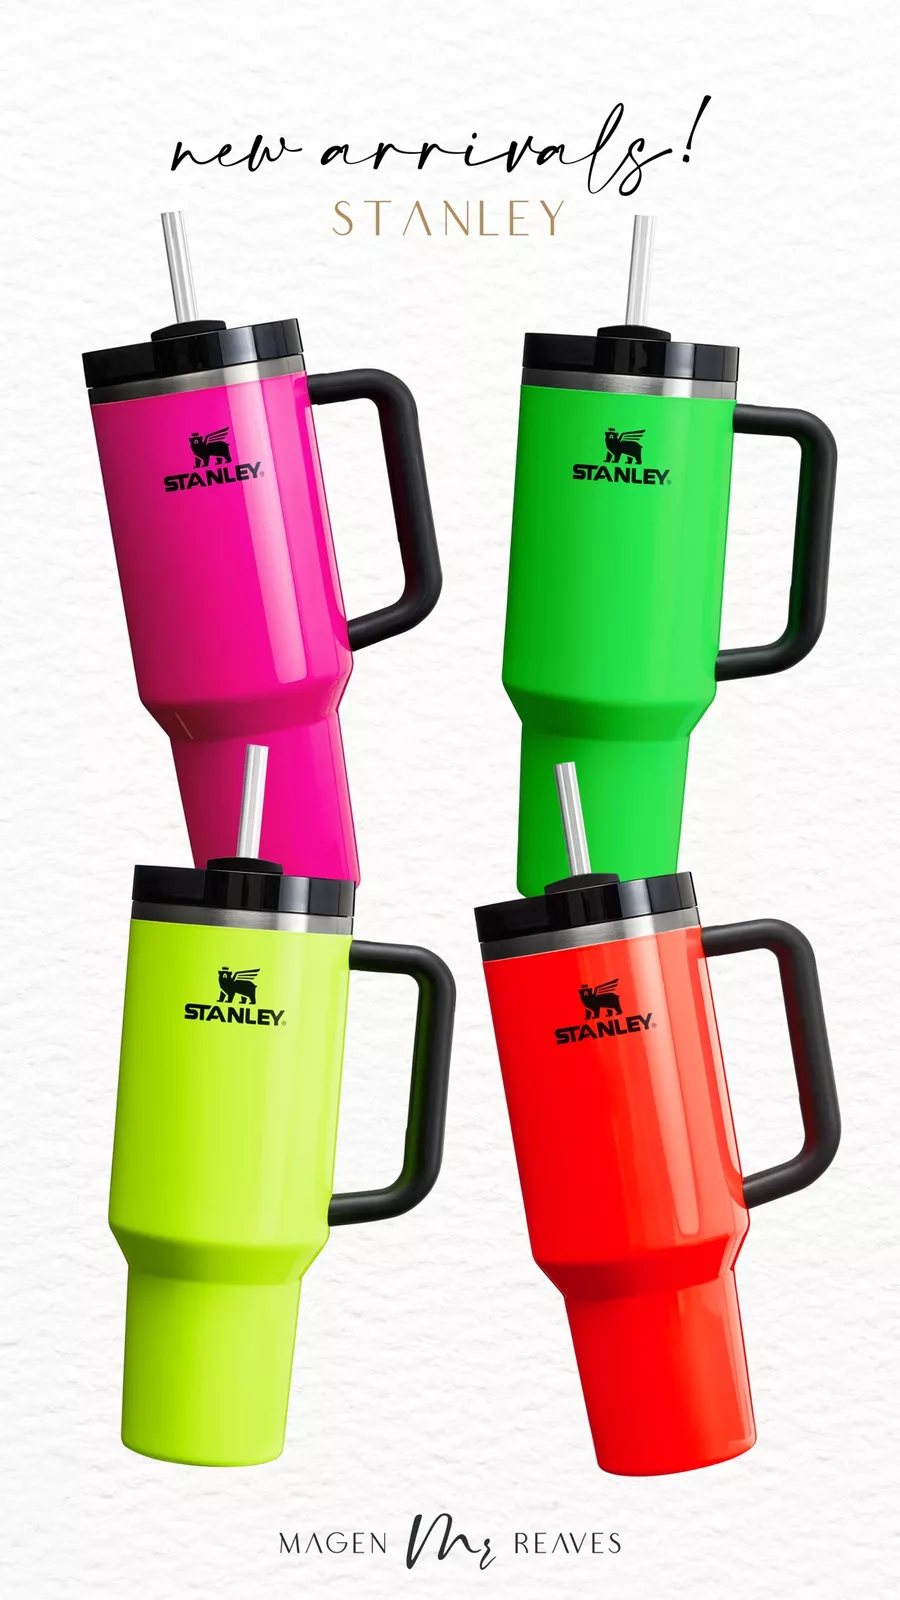 stanley new arrival, march best-sellers, neon stanley